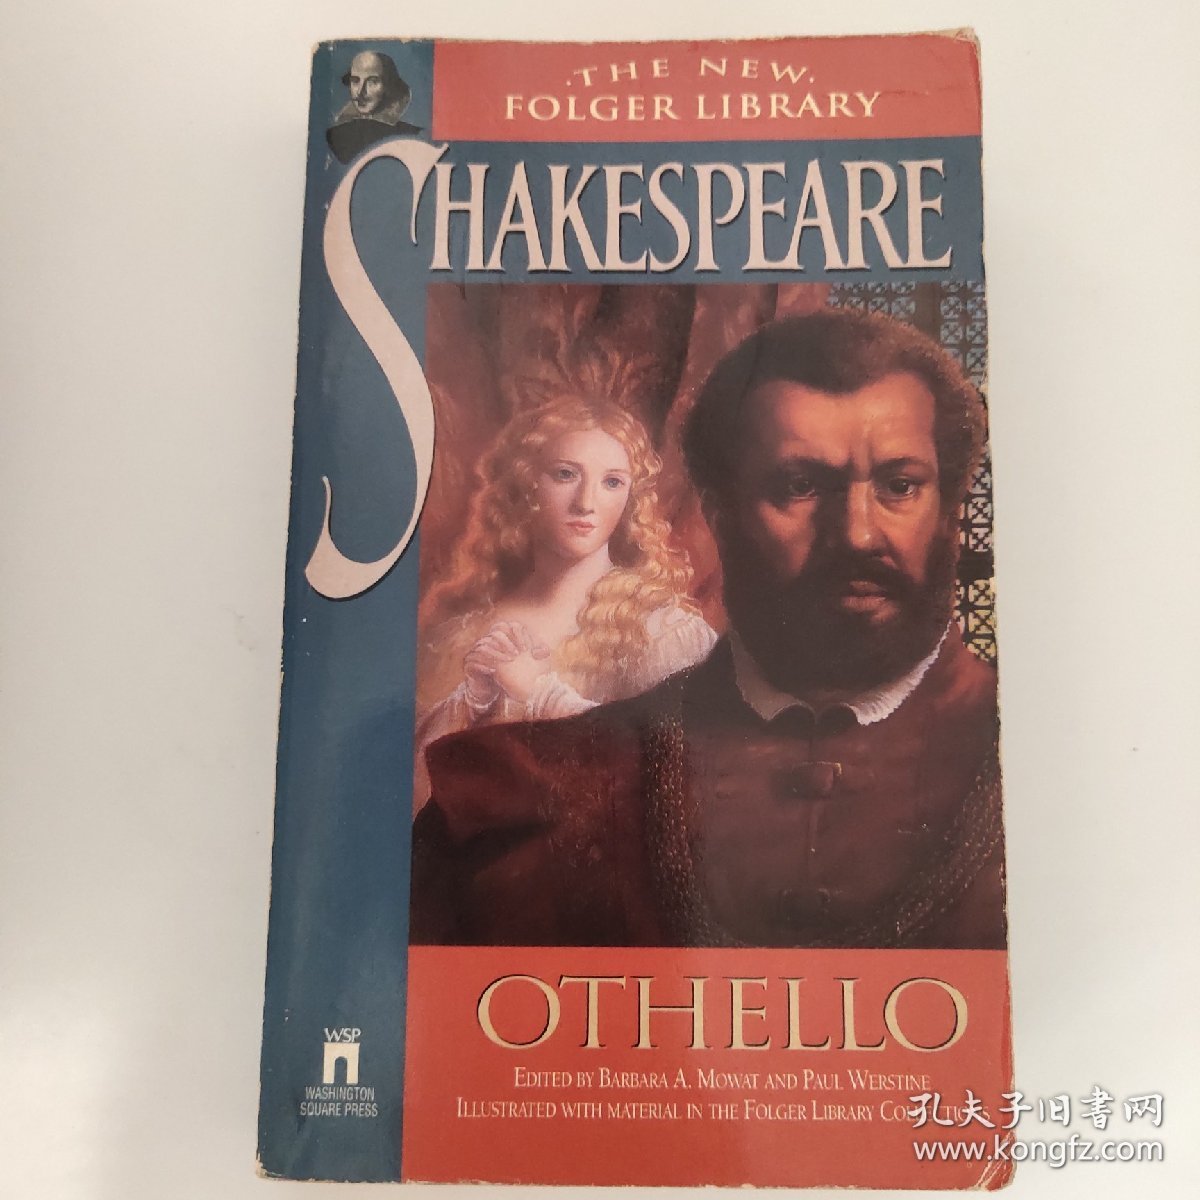 Othello (The New Folger Library Shakespeare)